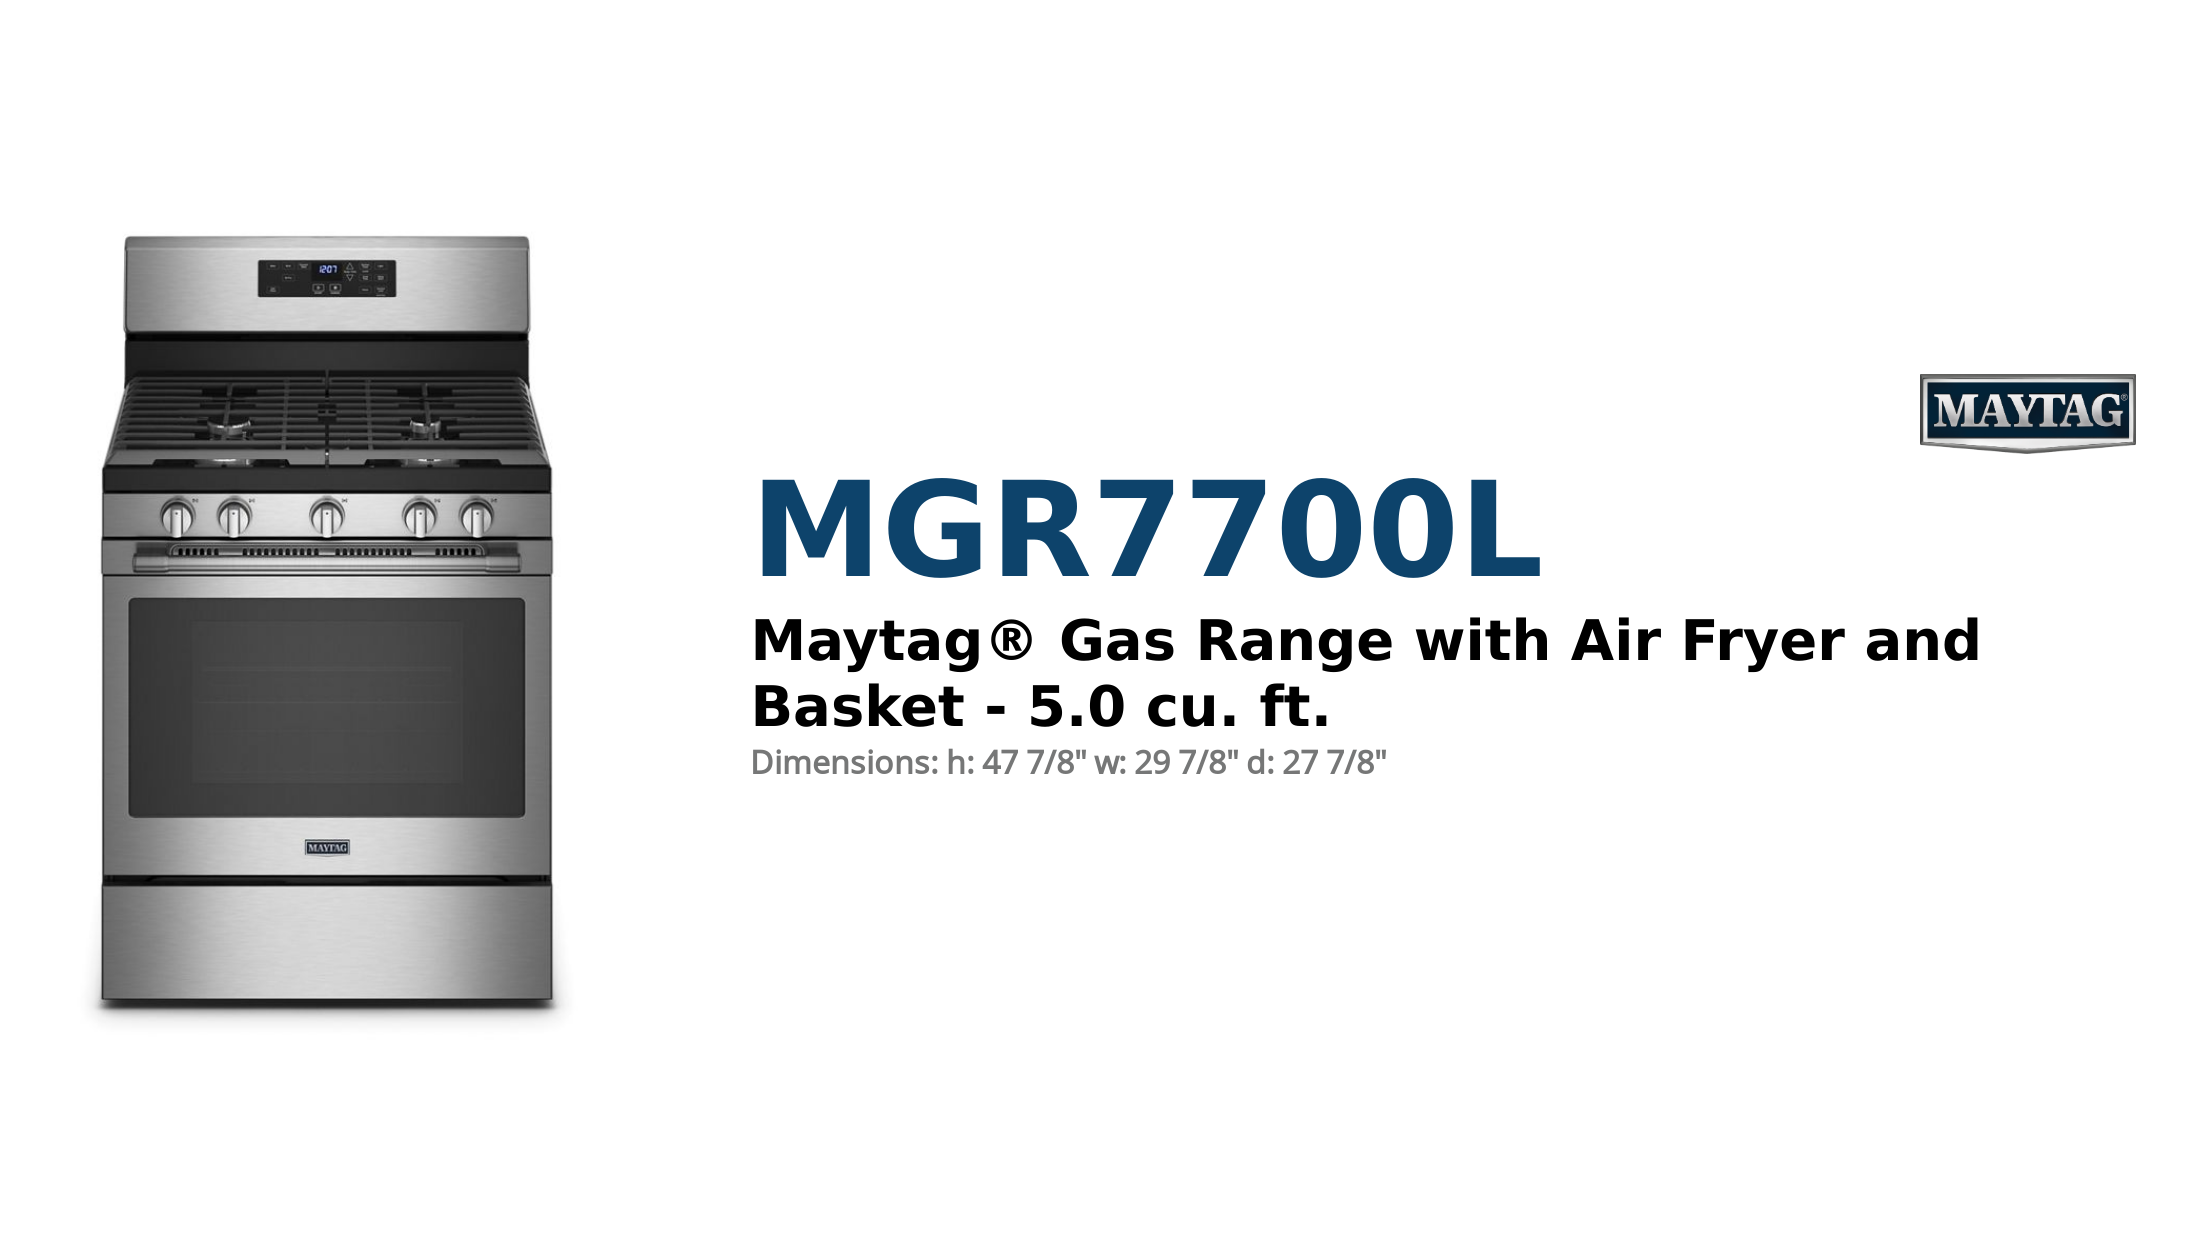 Maytag® Gas Range with Air Fryer and Basket - 5.0 cu. ft.
 